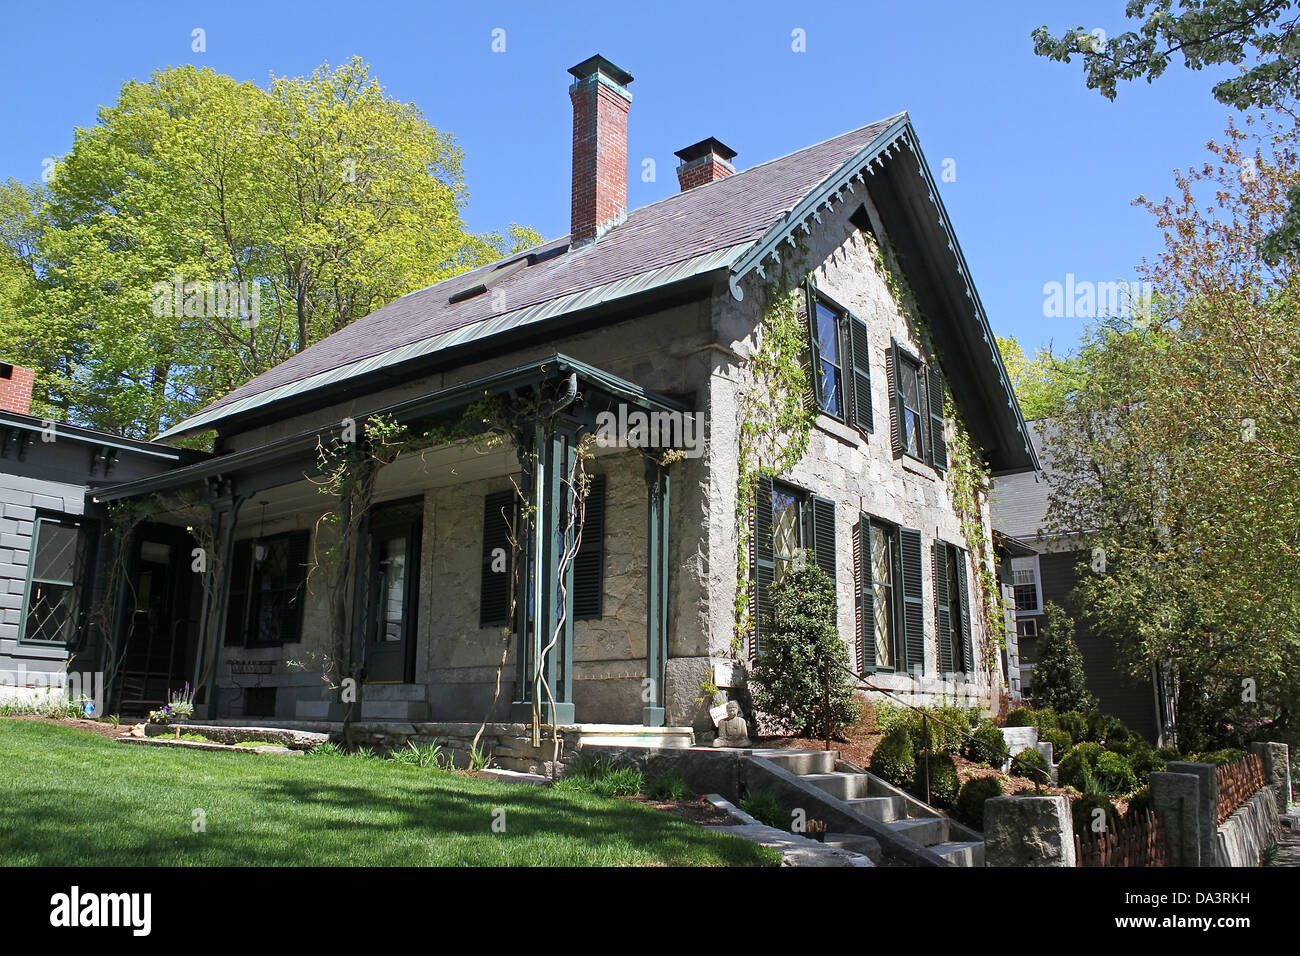 An old stone home in Concord, Massachusetts Stock Photo